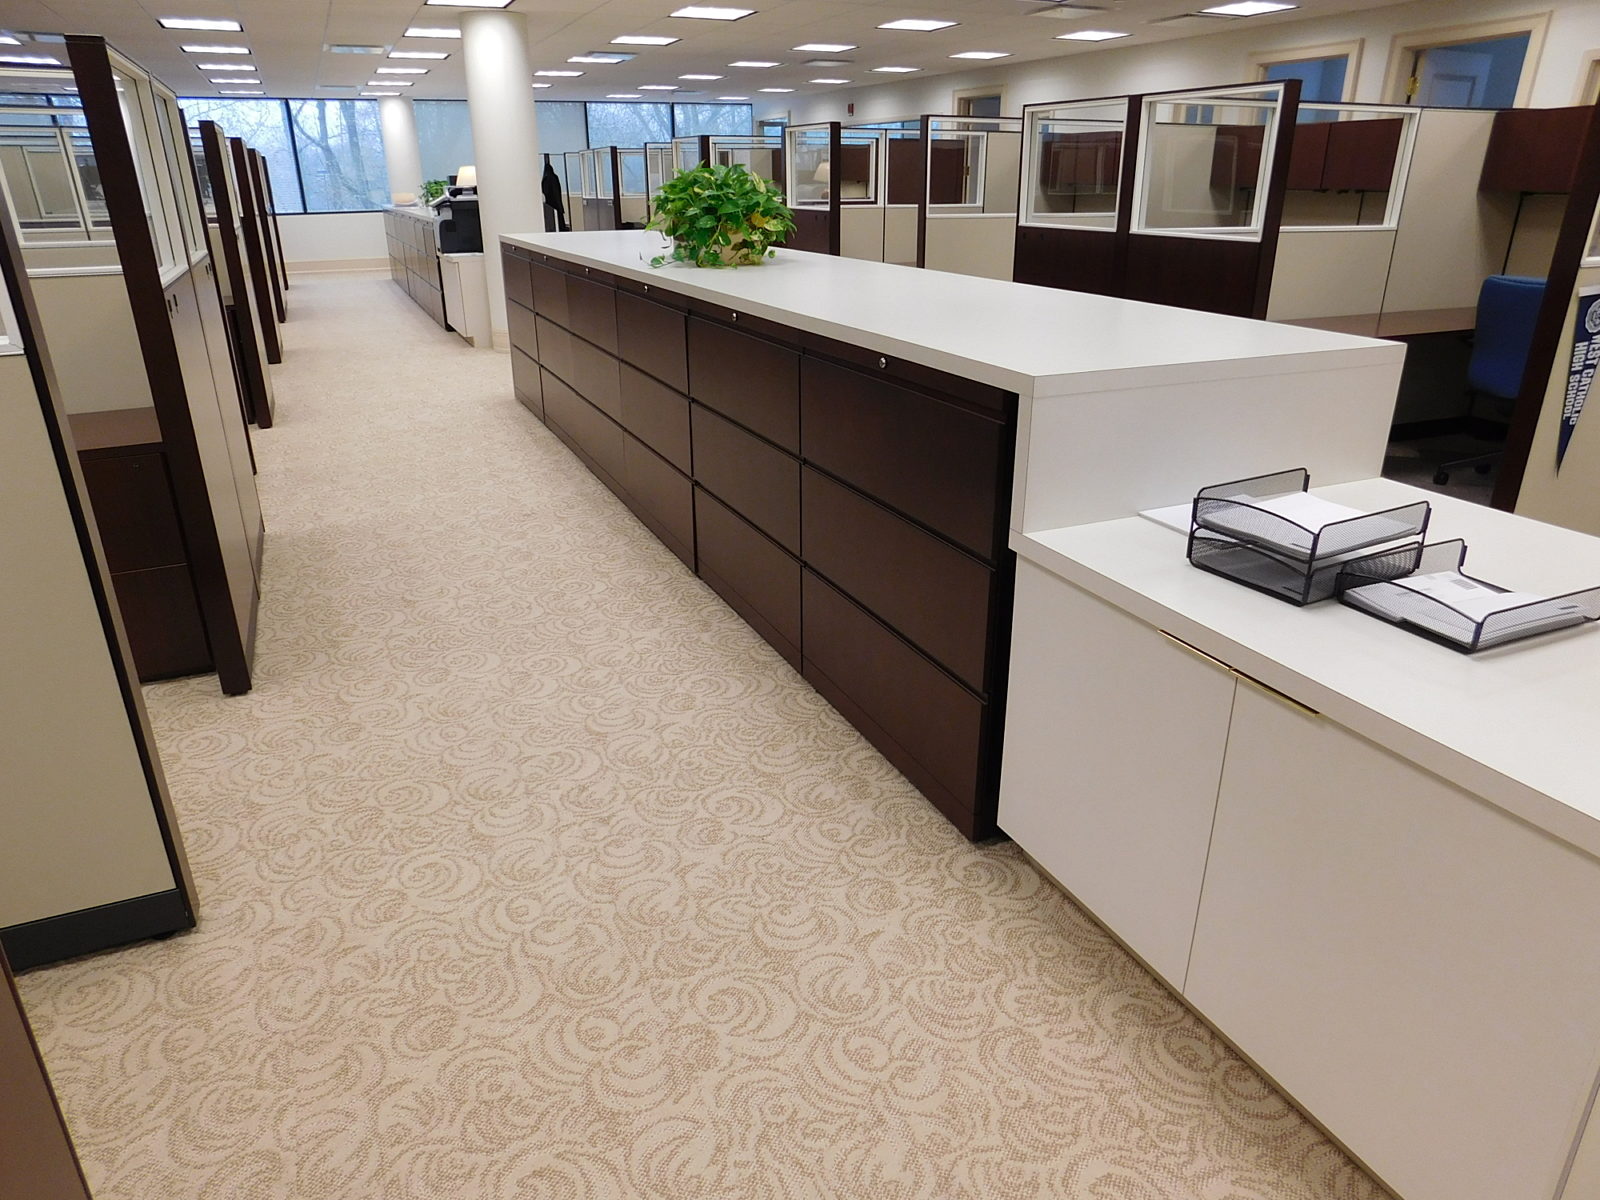 File bank with dark wood veneer drawer fronts, white laminate surround and surface